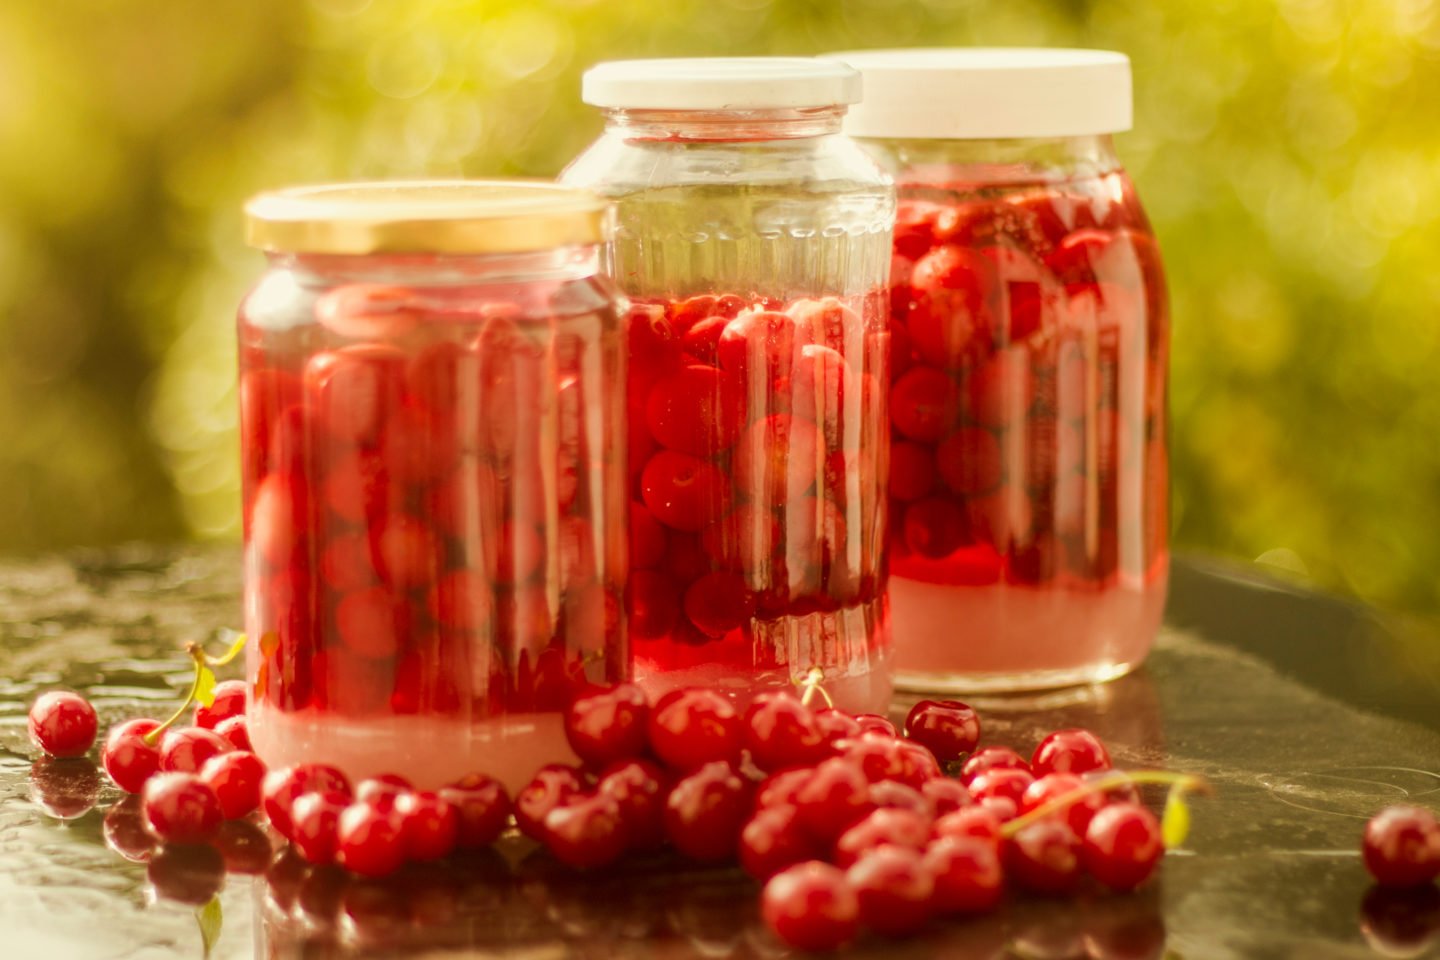 Maraschino Cherries In Jar With Syrup